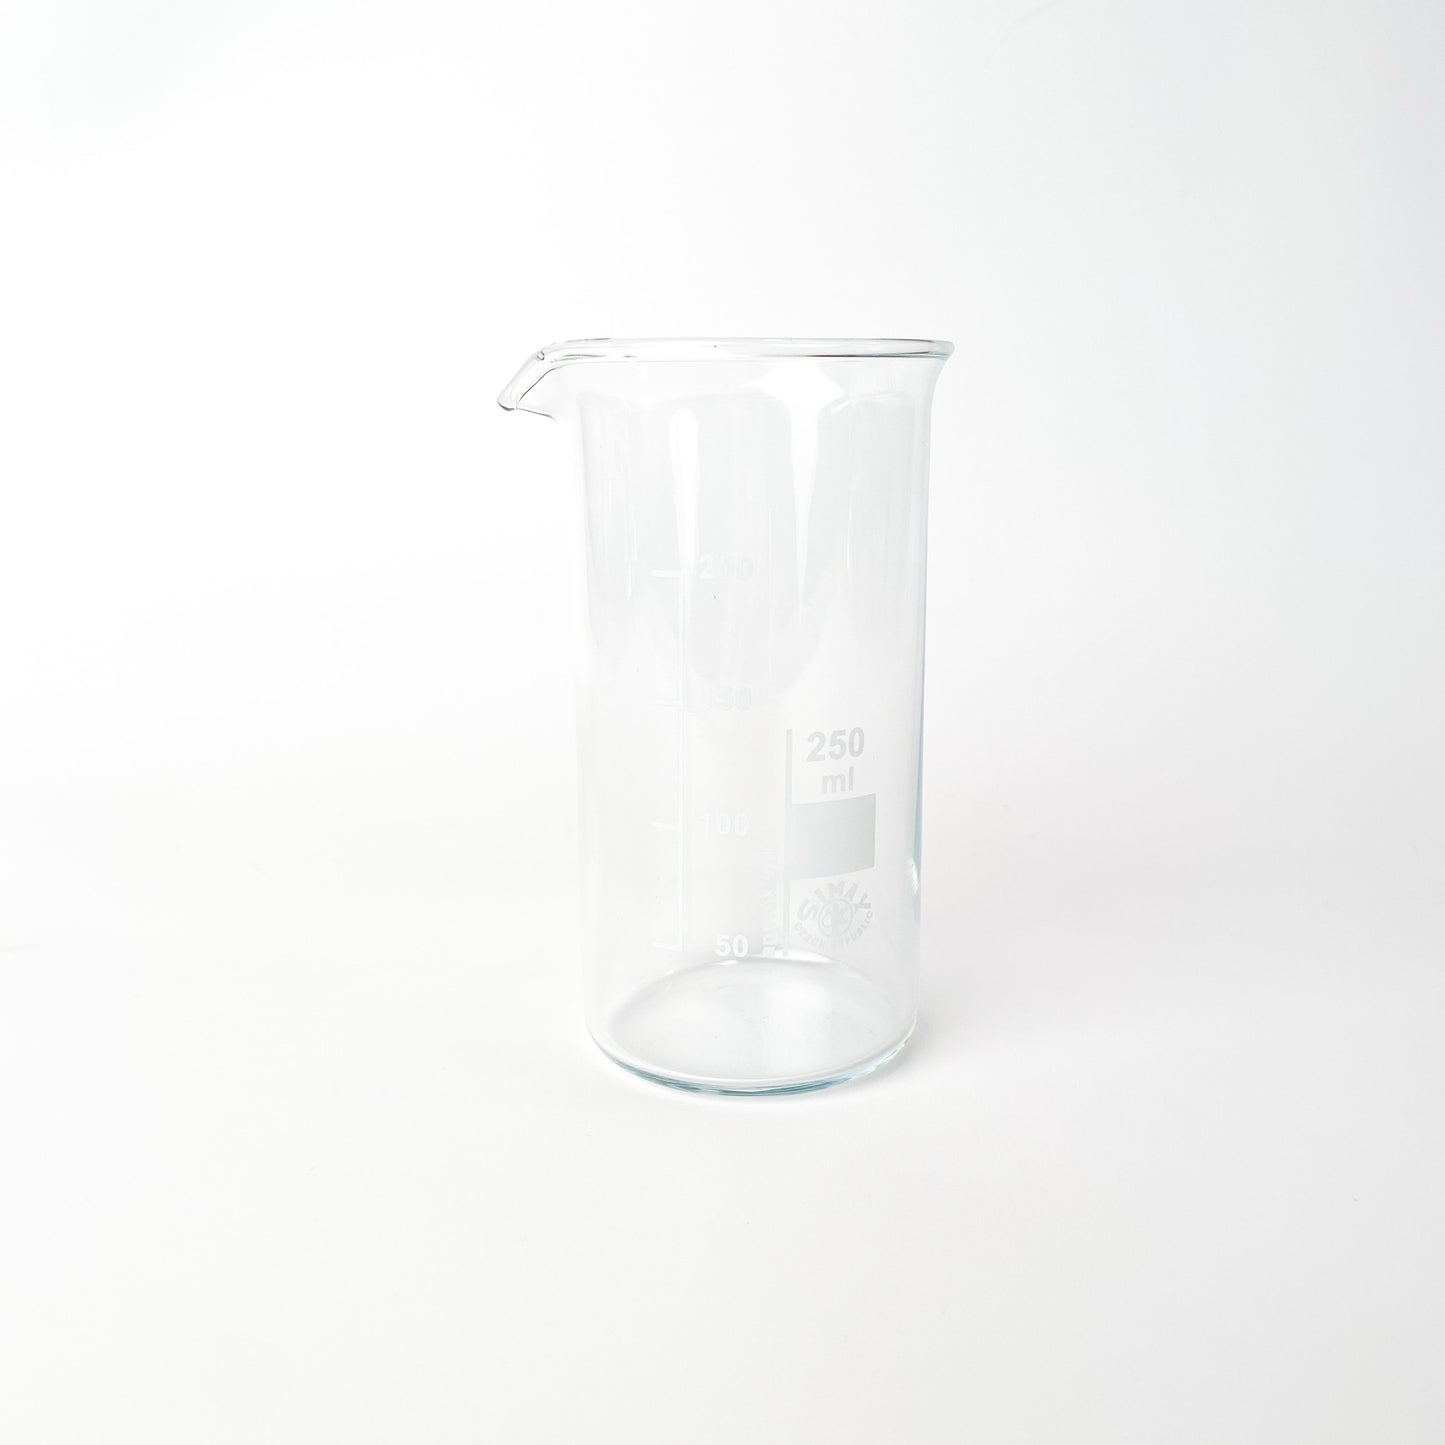 Lab glass sharing cup